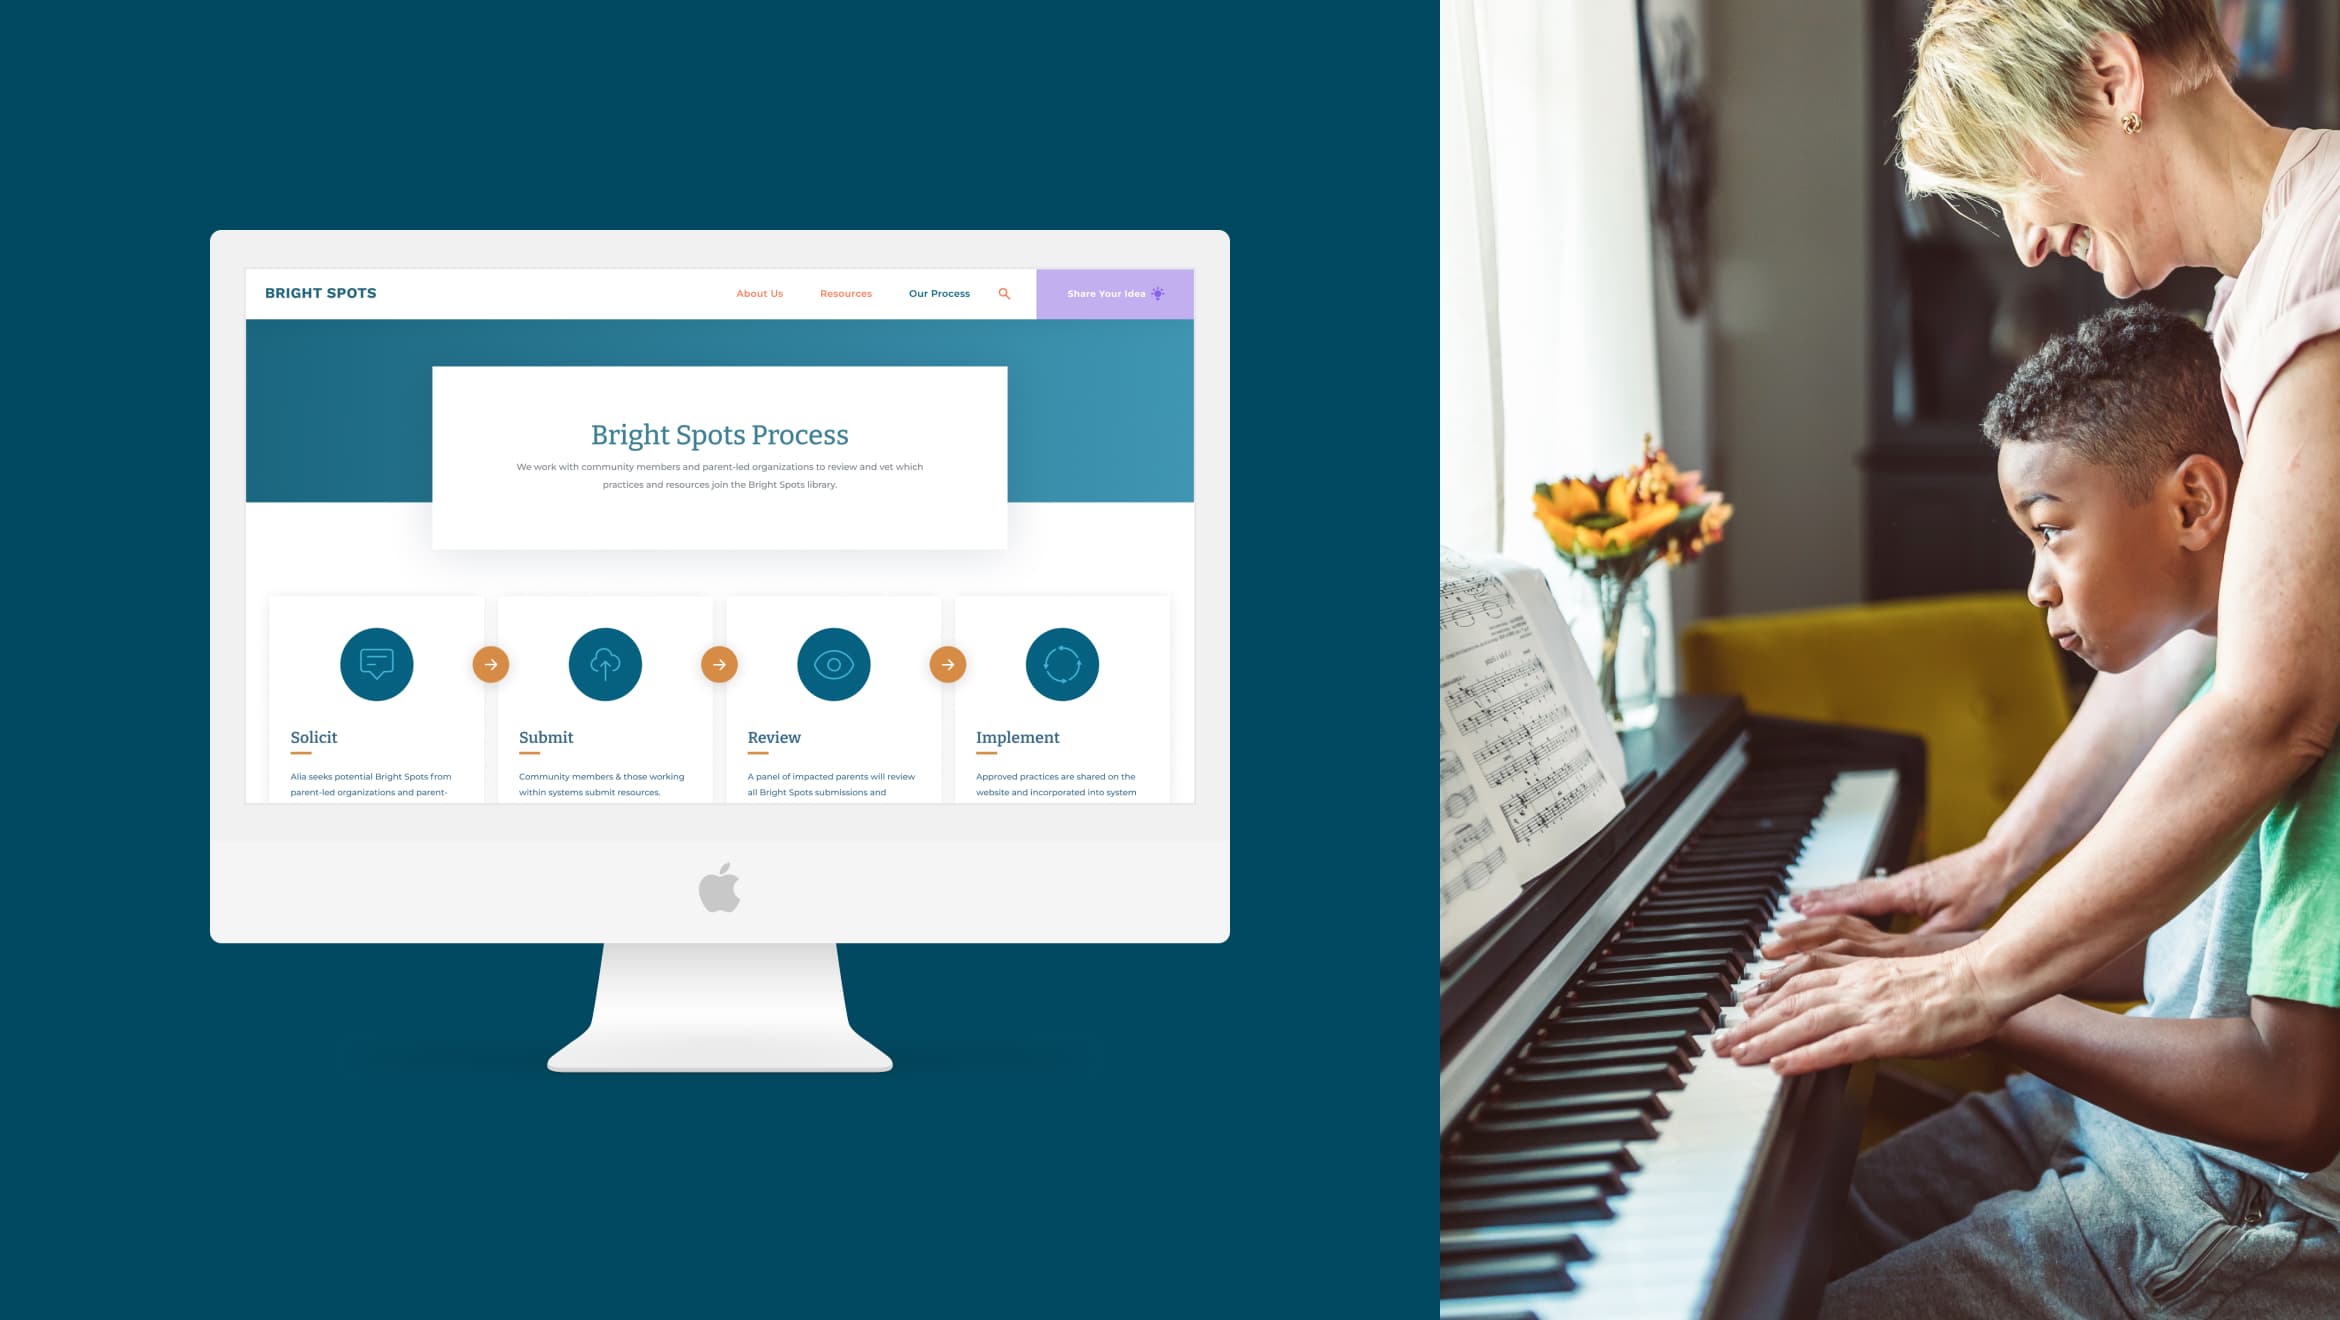 Split image. On the left is the Alia Bright Spots child welfare resource website on an imac desktop on top of a dark blue background. On the right side is an image of an adult helping a child play the piano in front of a sunny window.